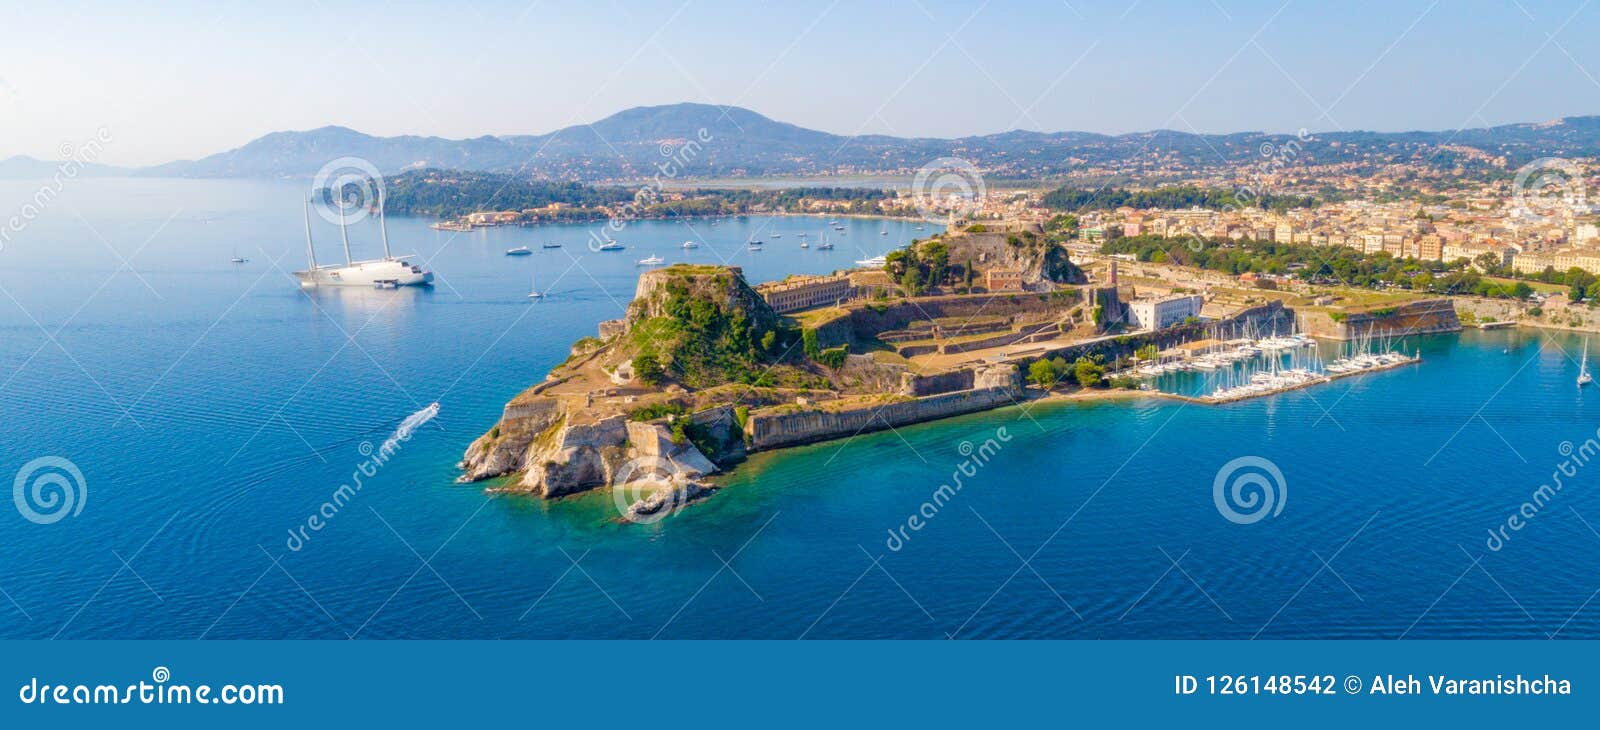 hellenic temple and old castle at corfu, greece